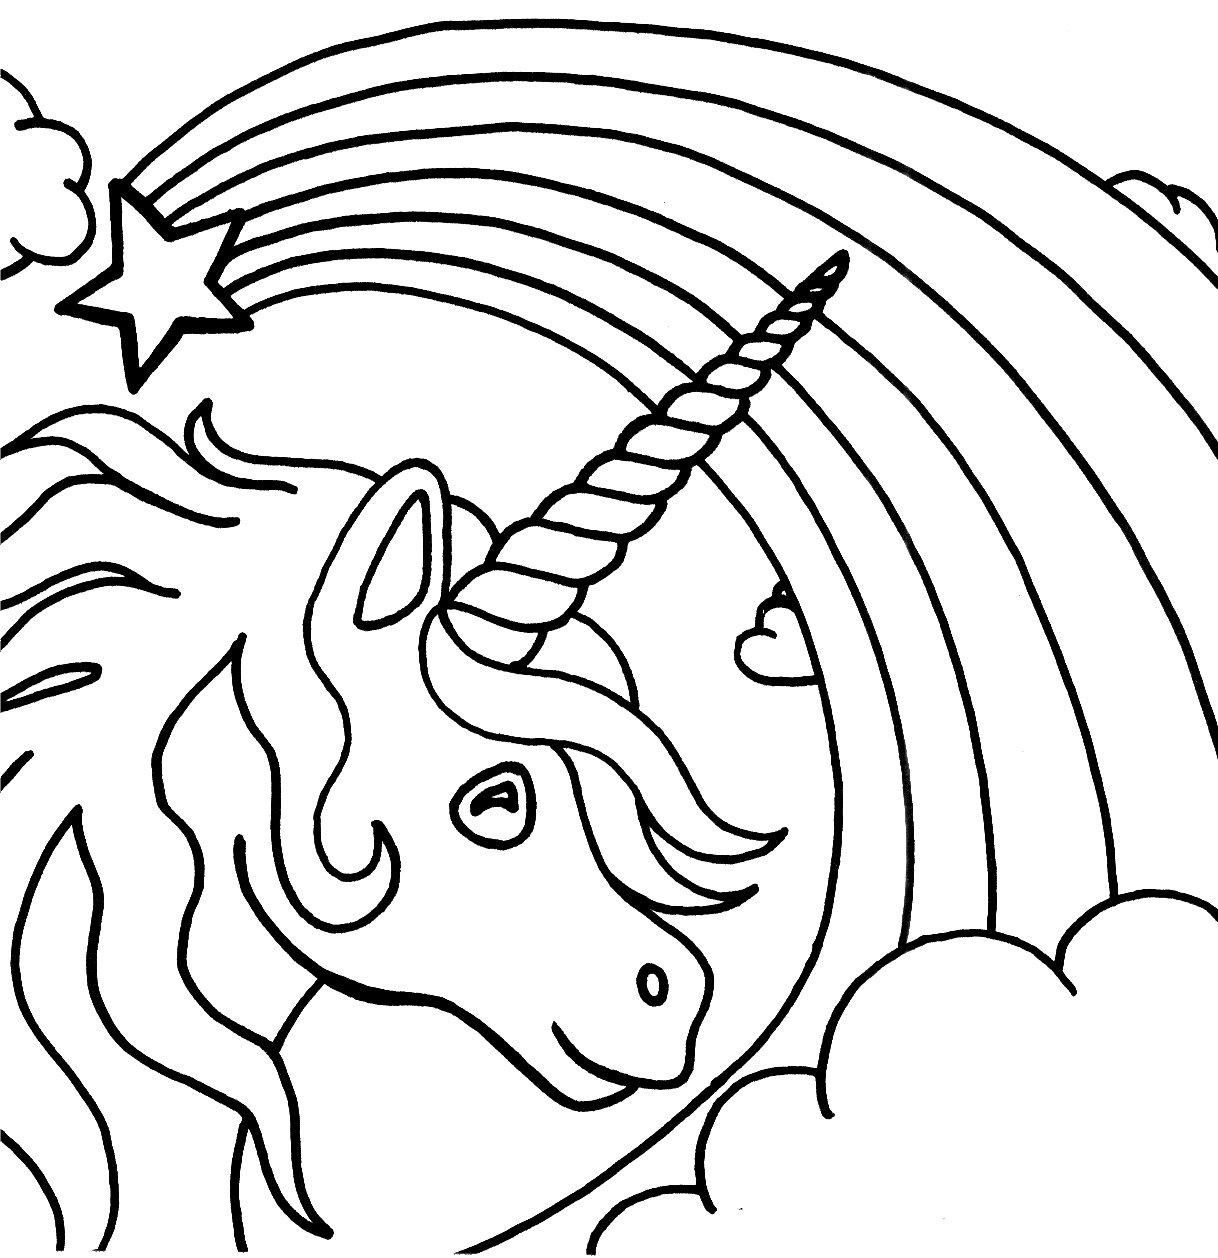 Printable Unicorn Pictures To Color